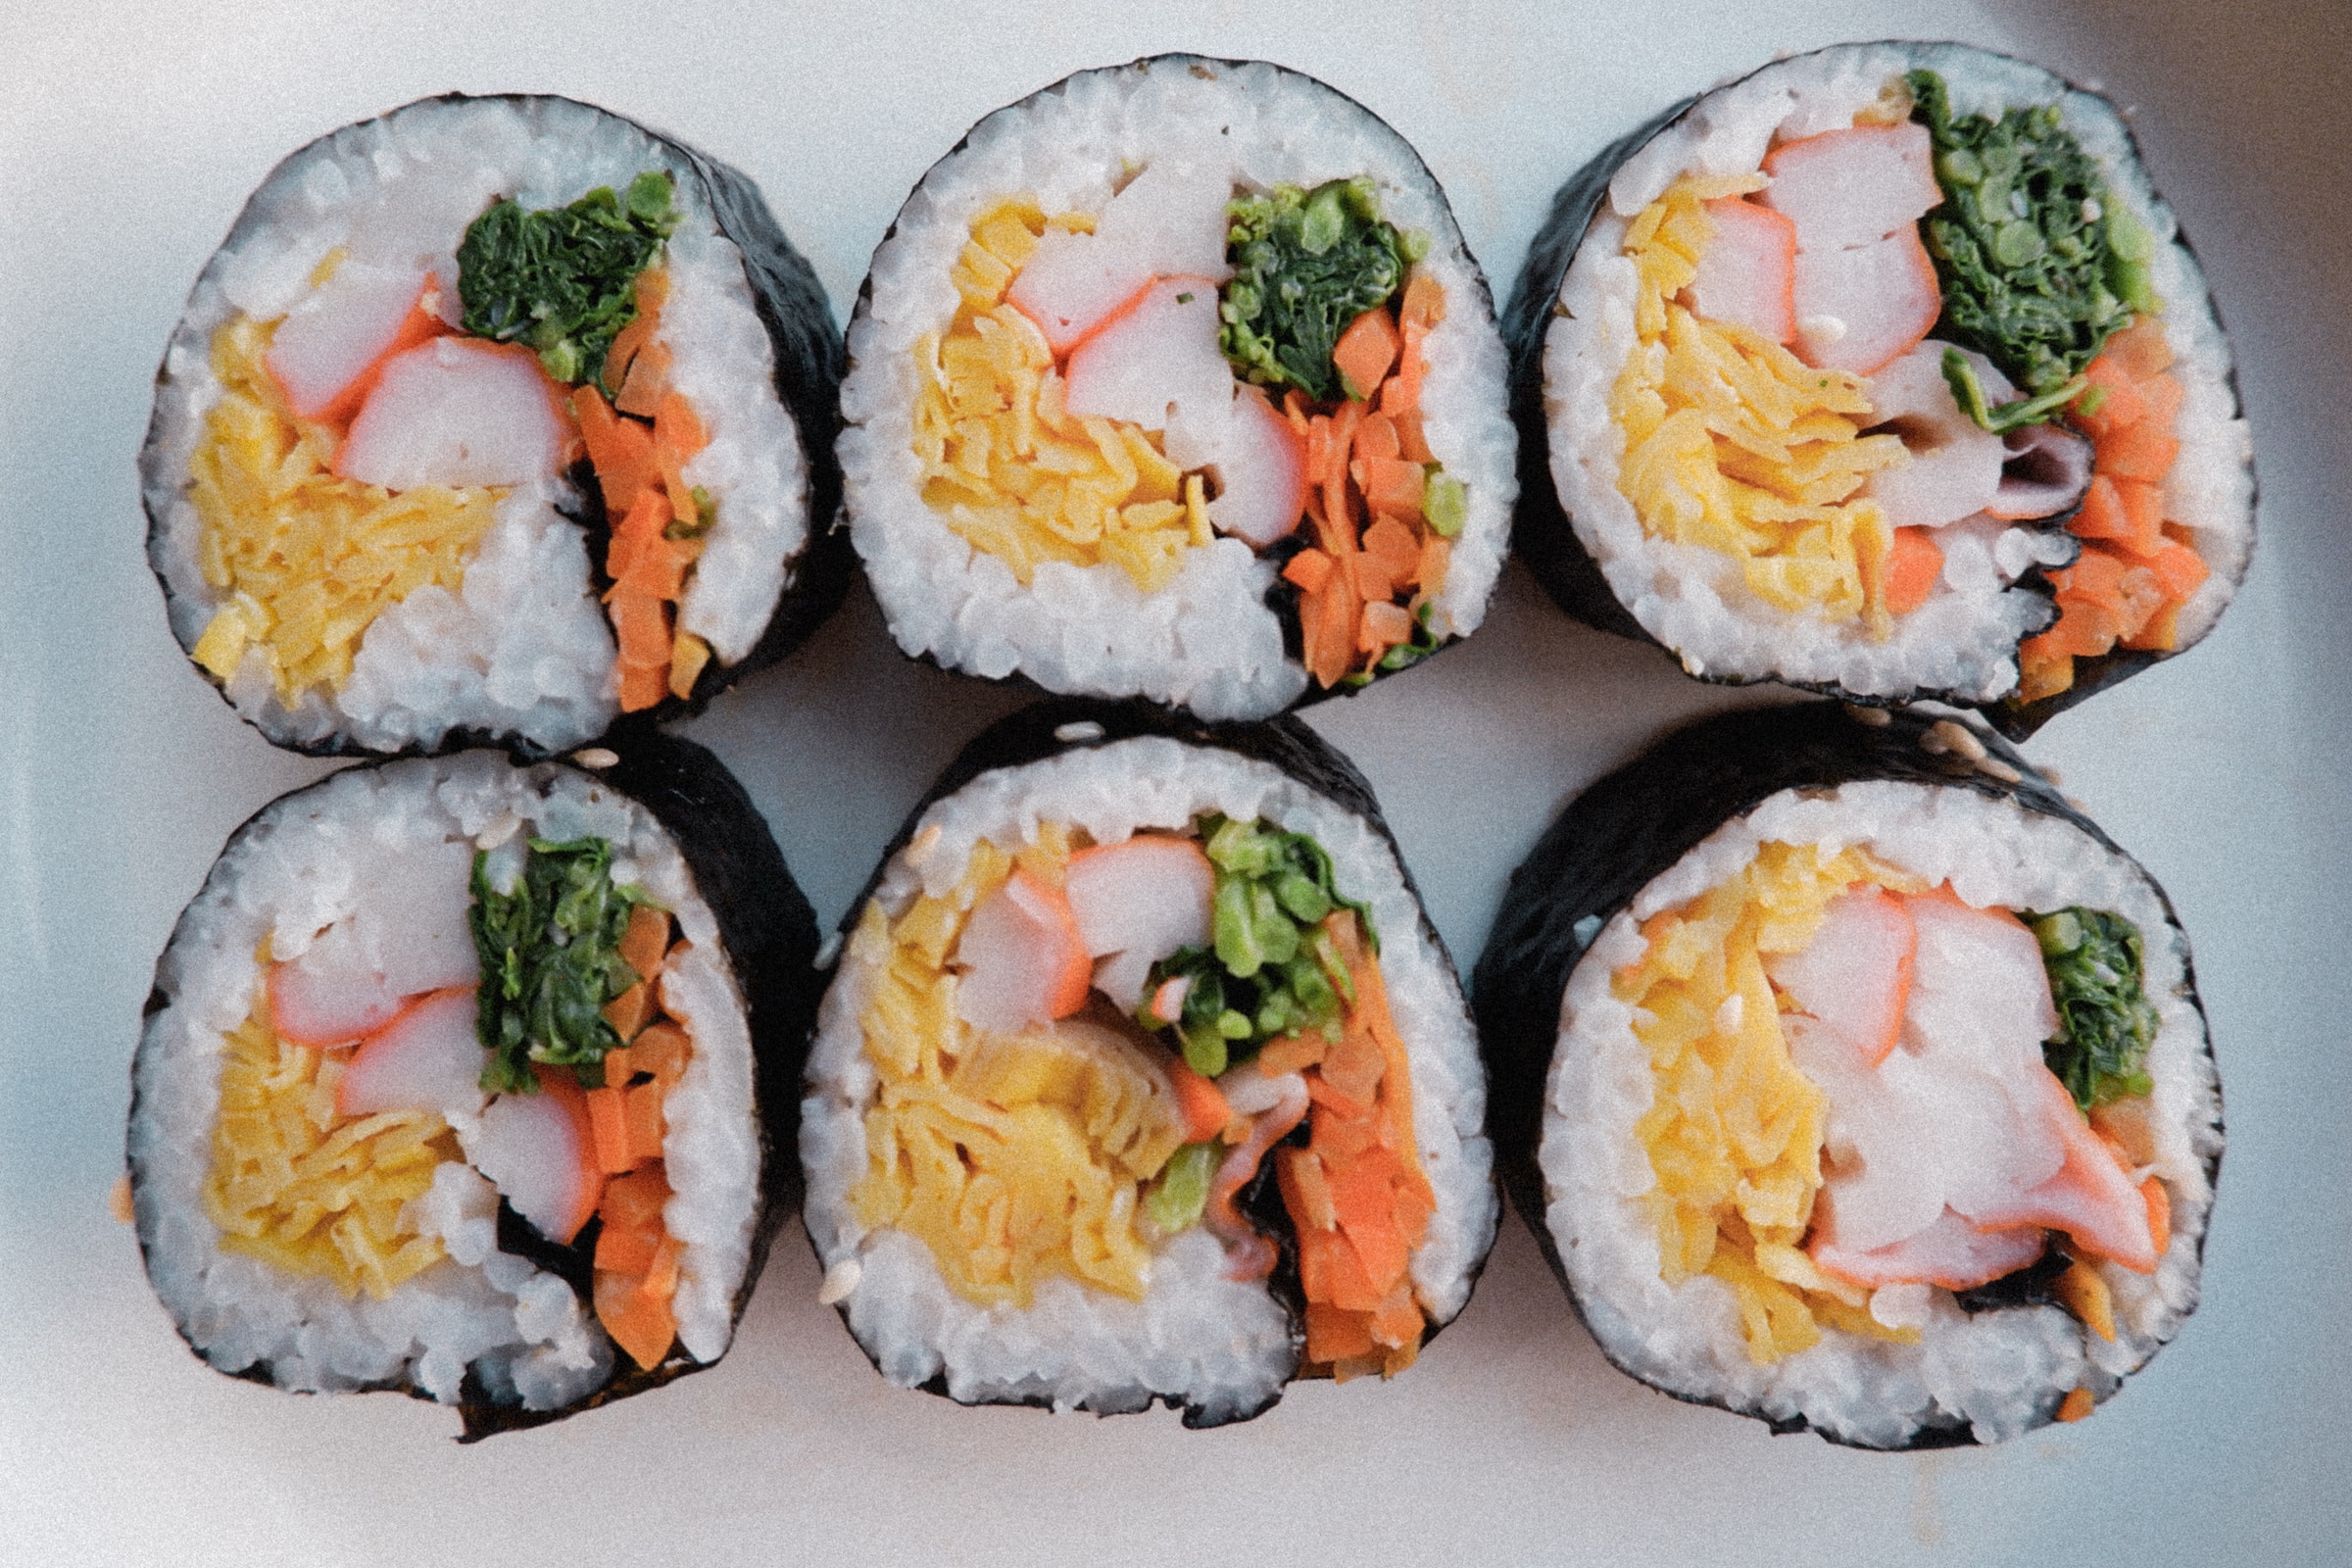 Mmm, let's eat some kimbap! Picnics are popular on National Children's Day